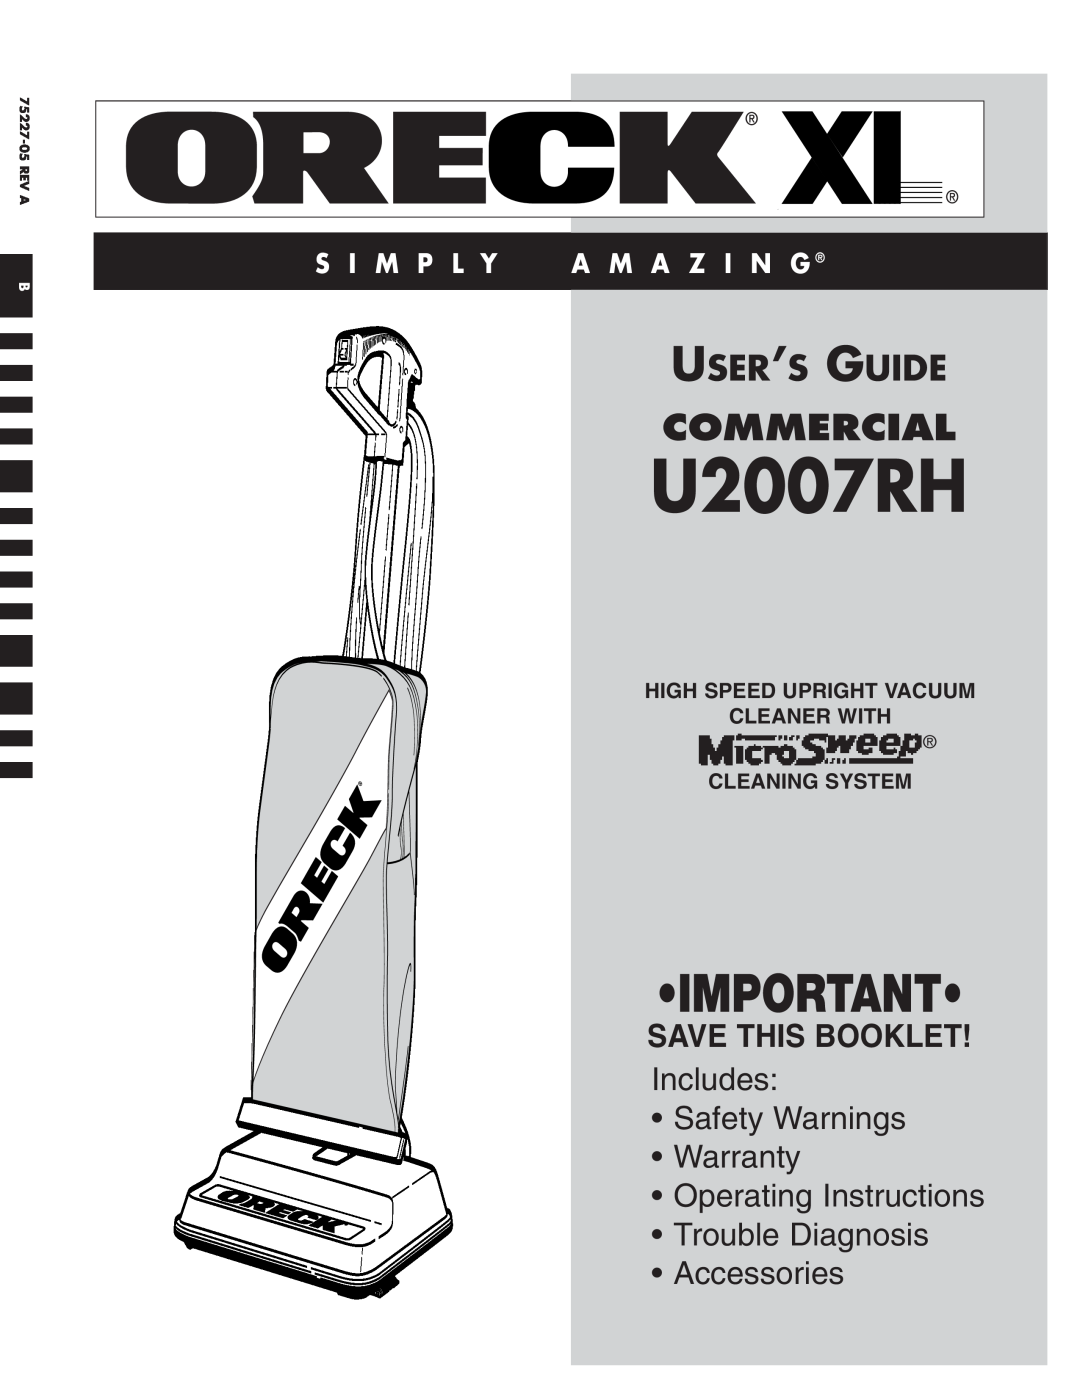 Oreck U2007RH warranty Commercial, User’S Guide, Save This Booklet, Includes Safety Warnings Warranty, Accessories 